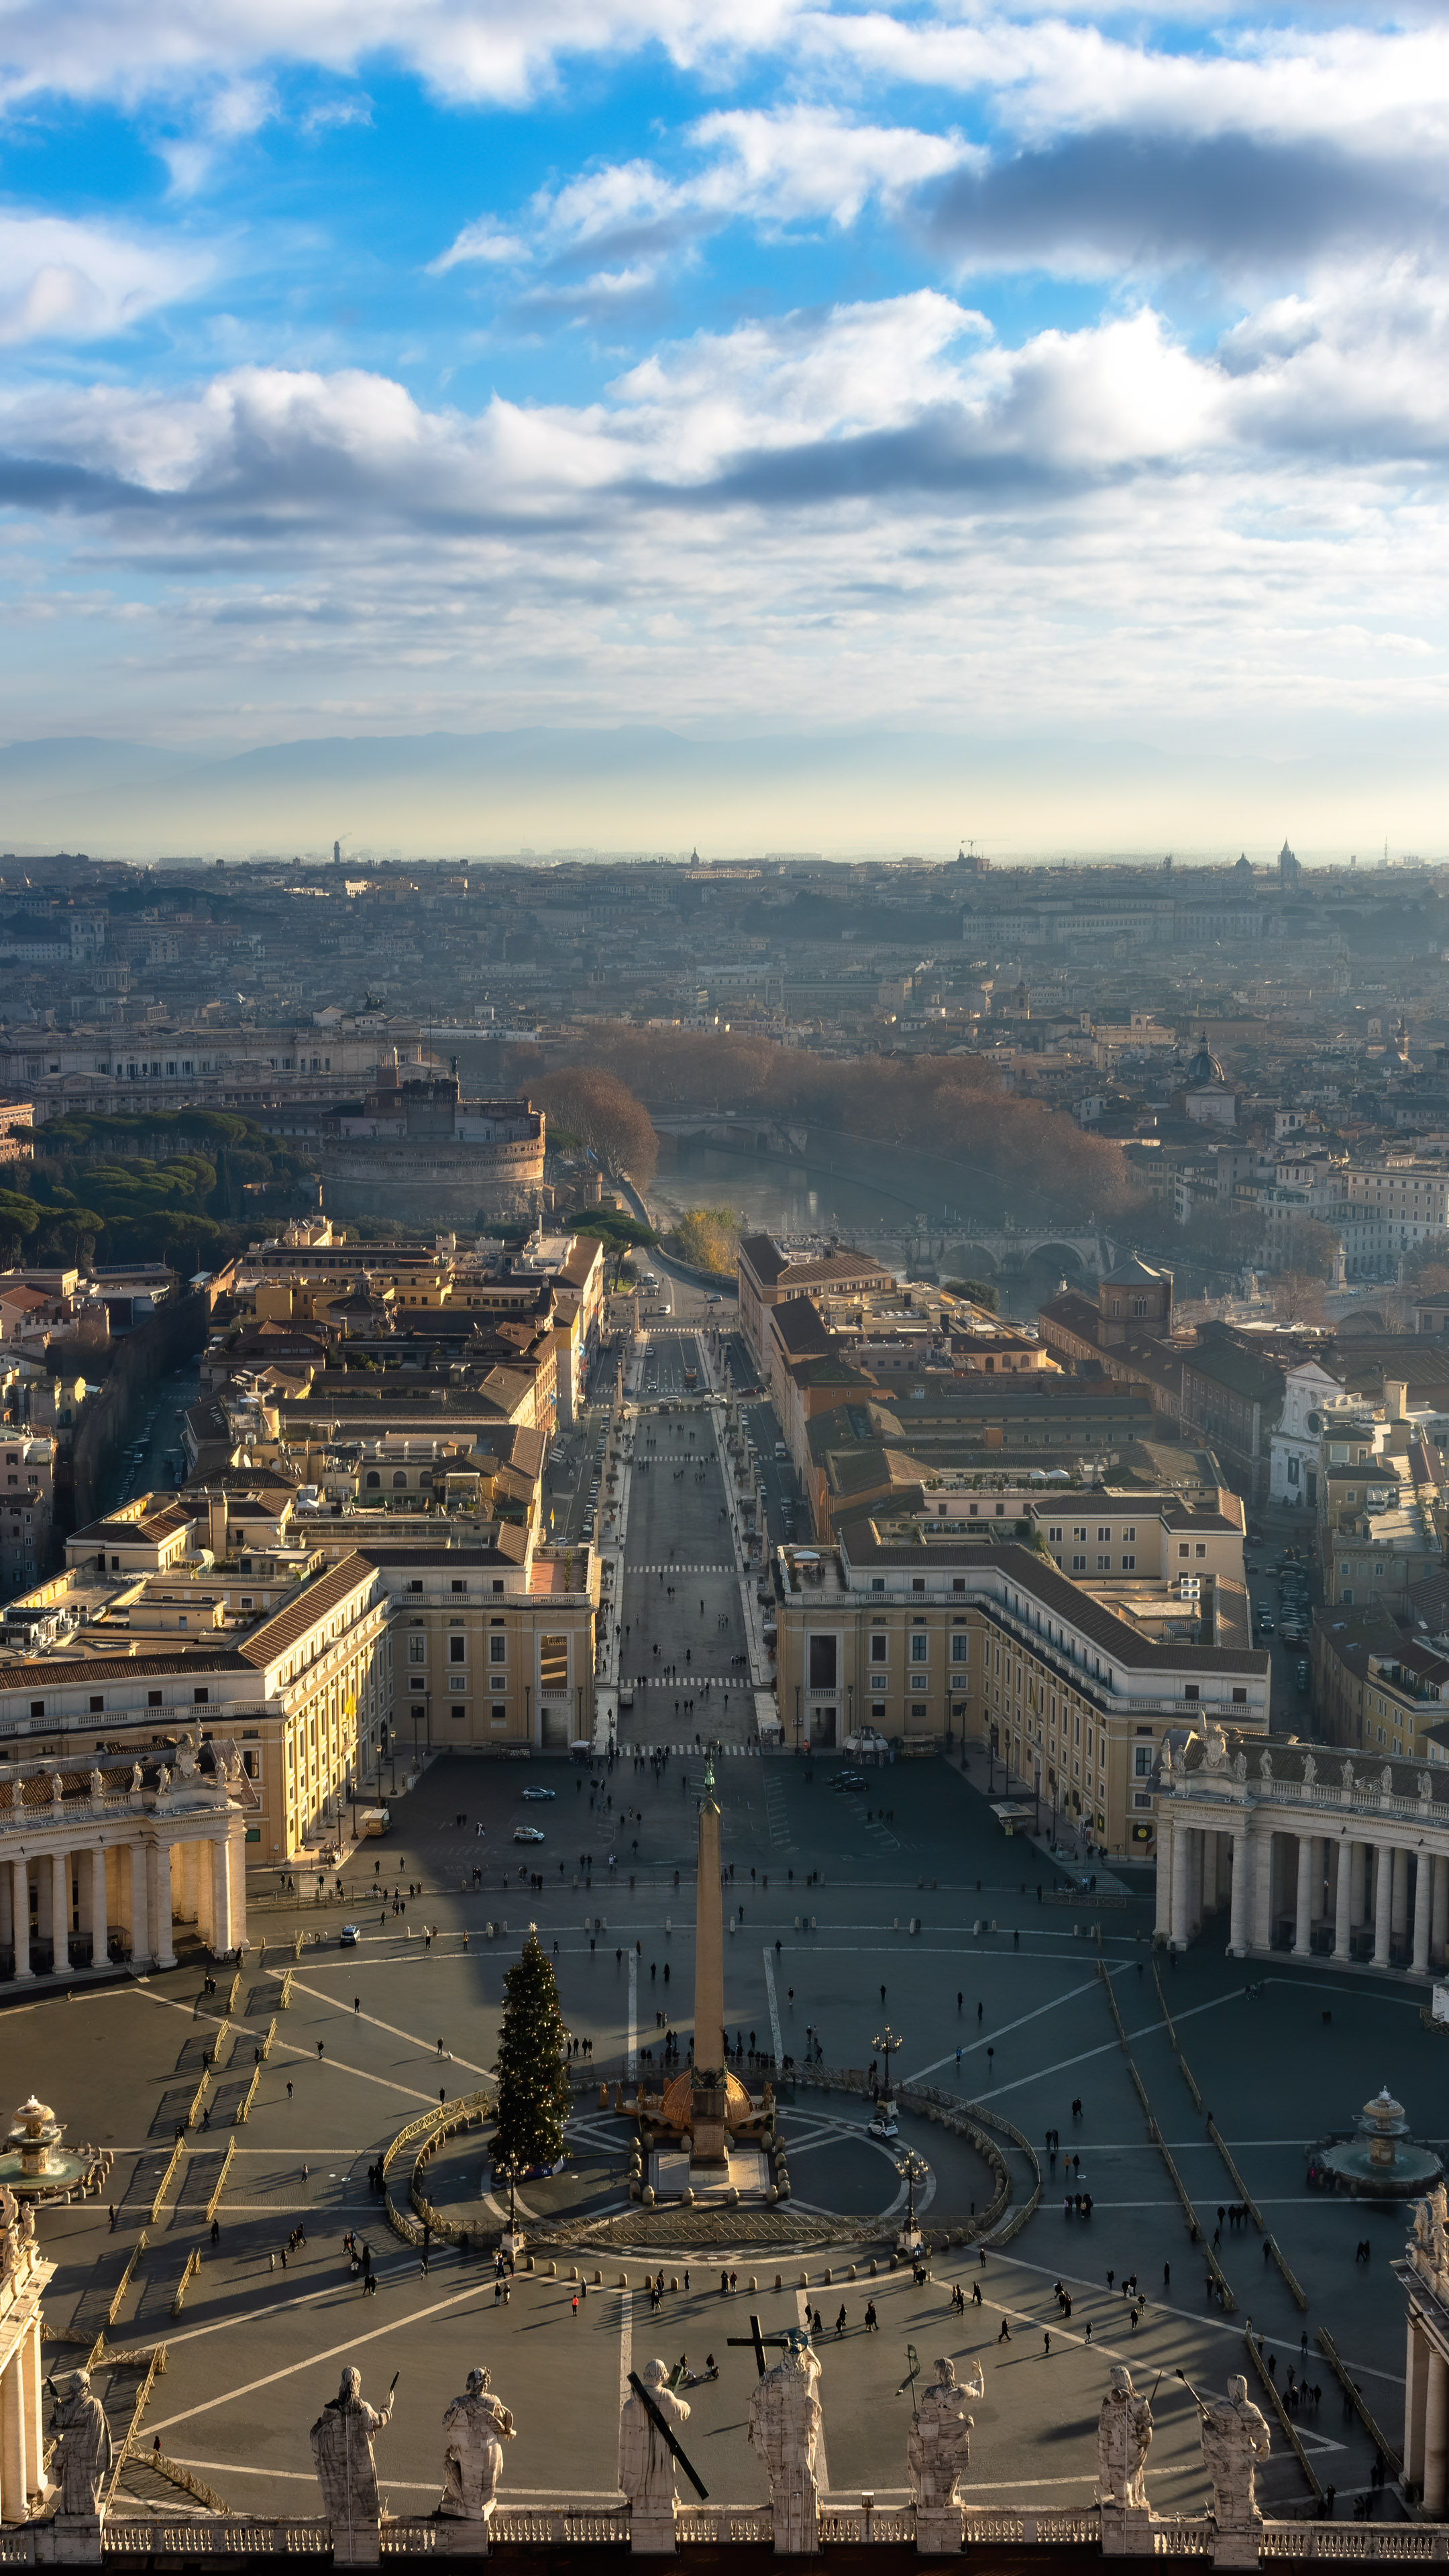 Get a bird's eye view of Rome's breathtaking cityscape from Vatican with our wallpaper.